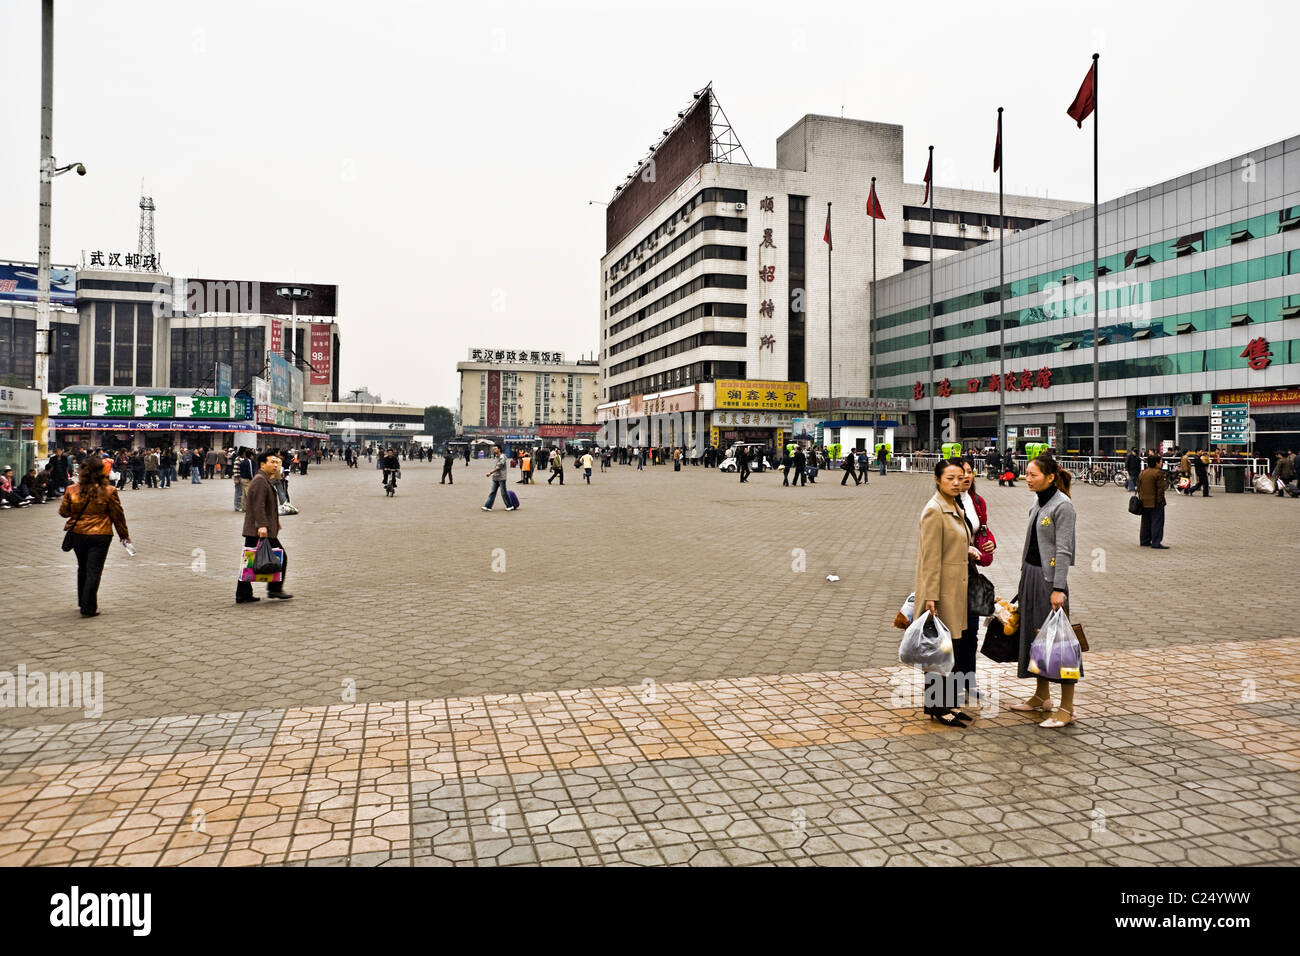 CHINA, WUHAN: Hankou Railway Station in Wuhan with plaza and people traveling to the train. Photo Illustration. Stock Photo